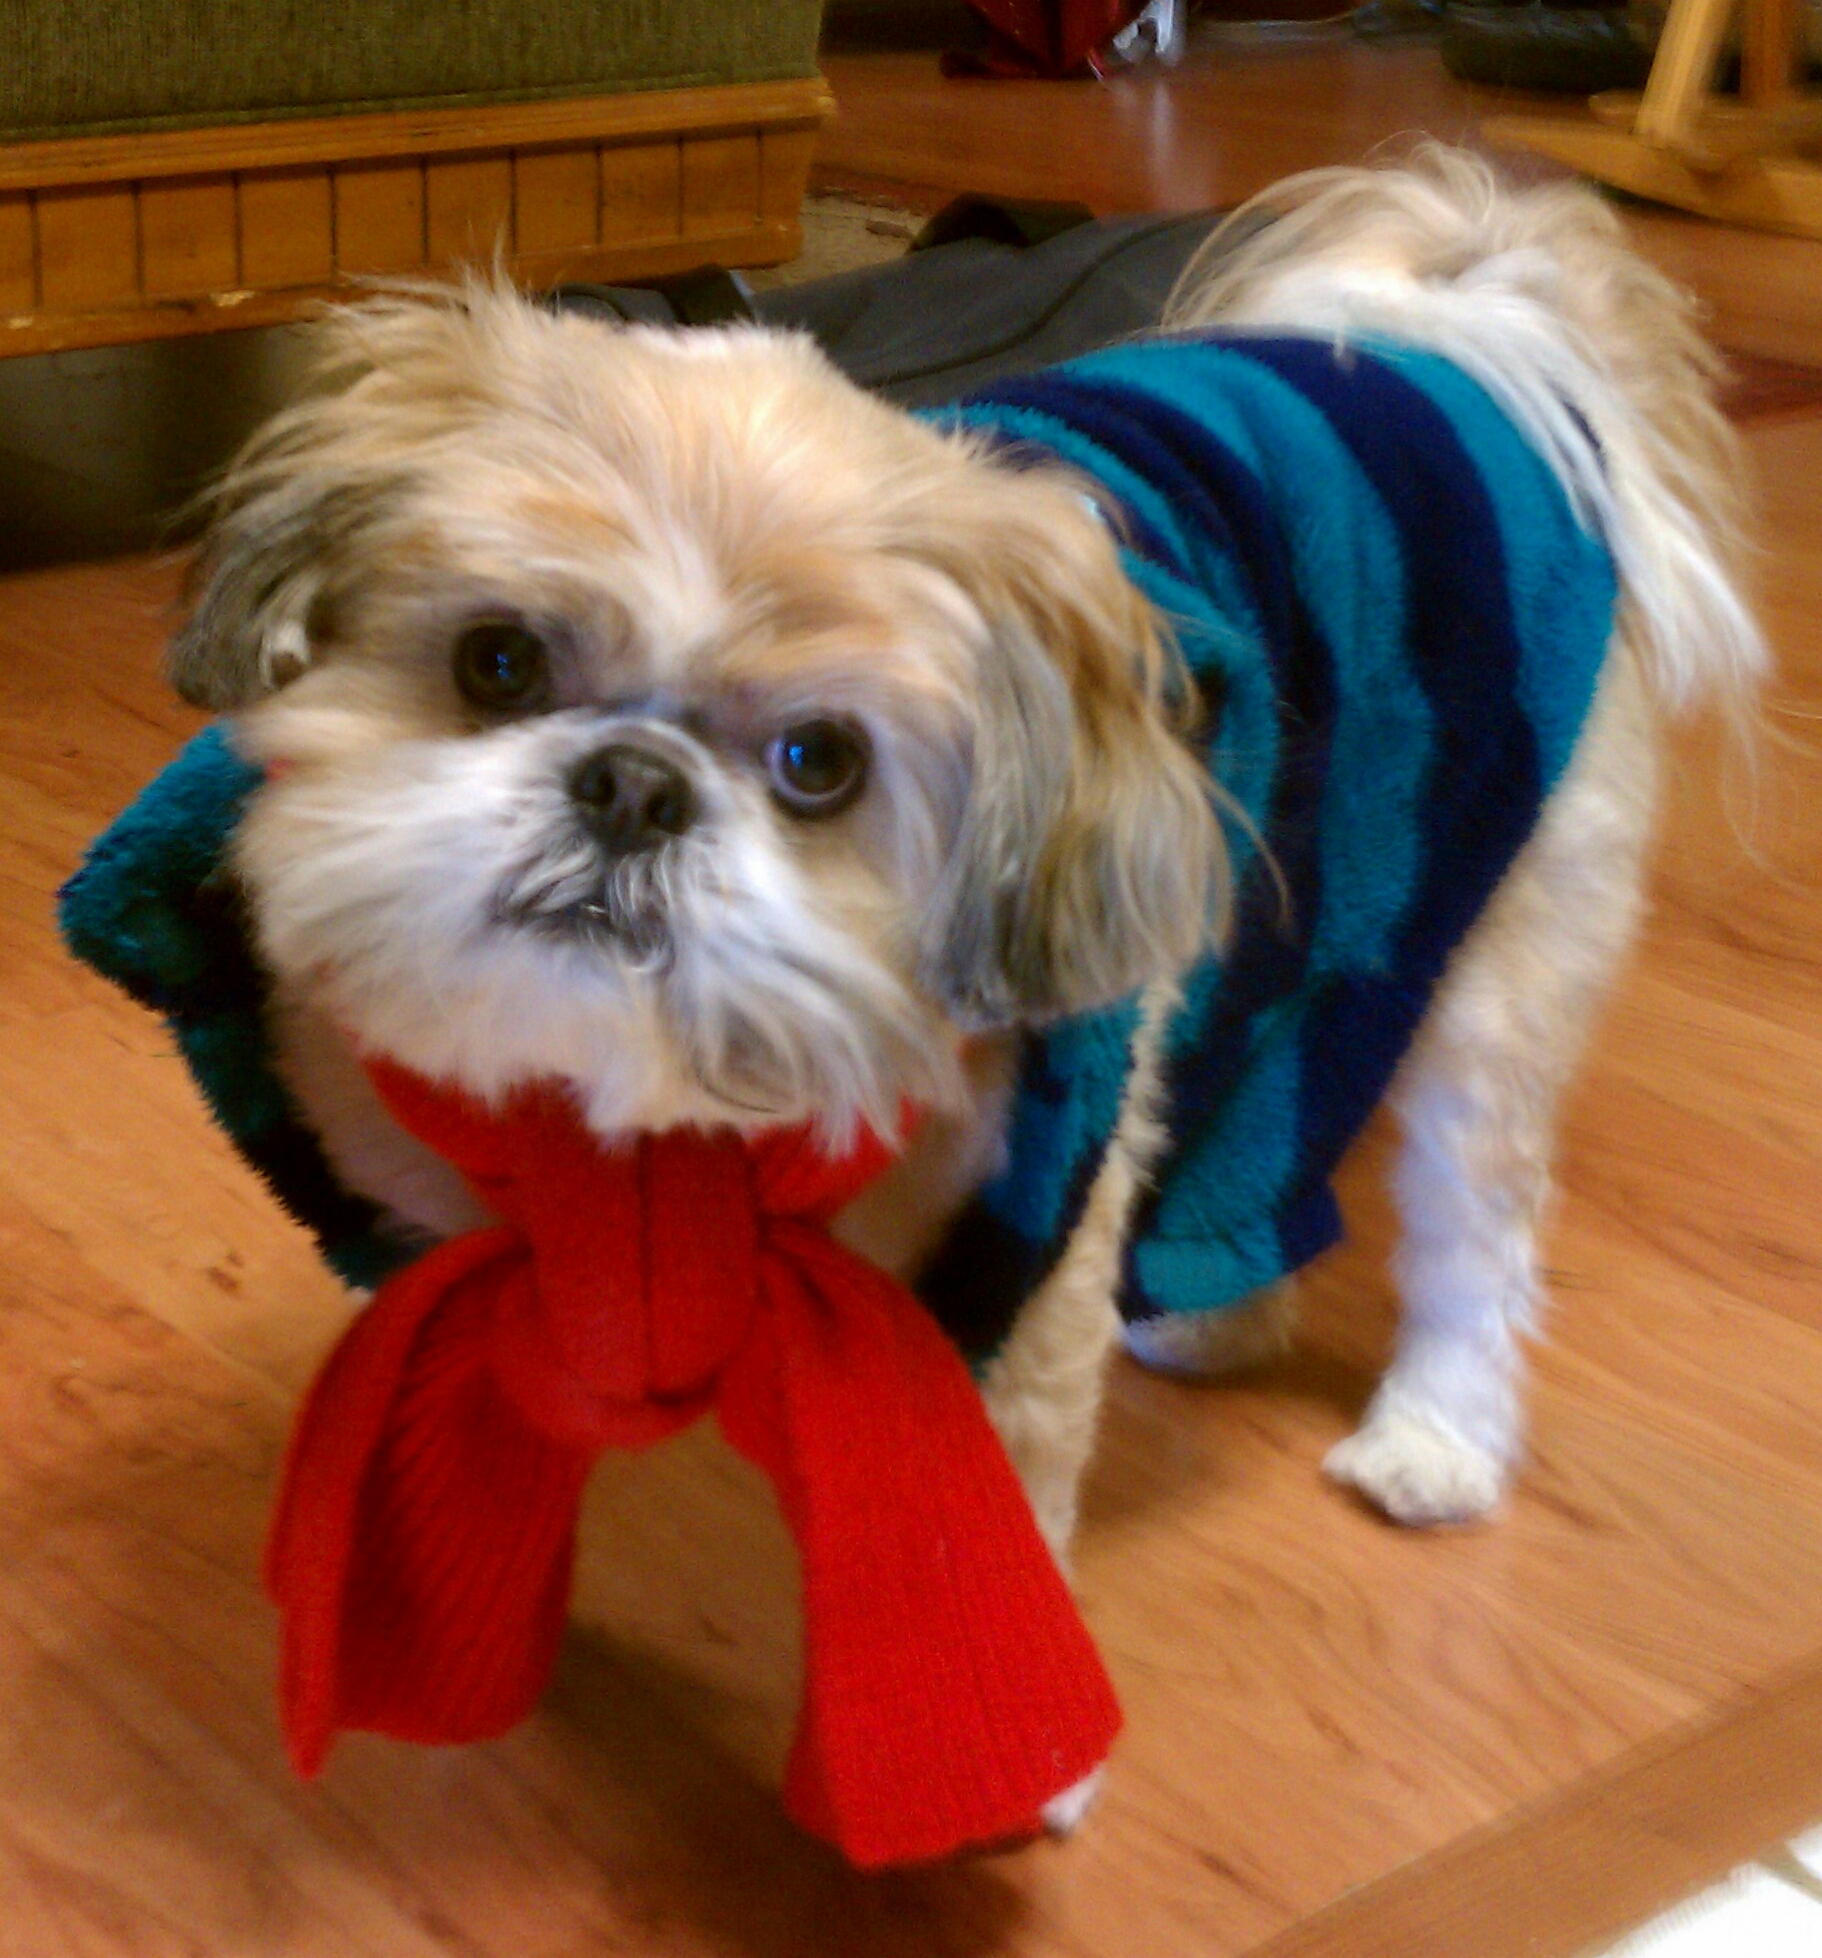 A dog wearing a sweater and holding a red scarf.